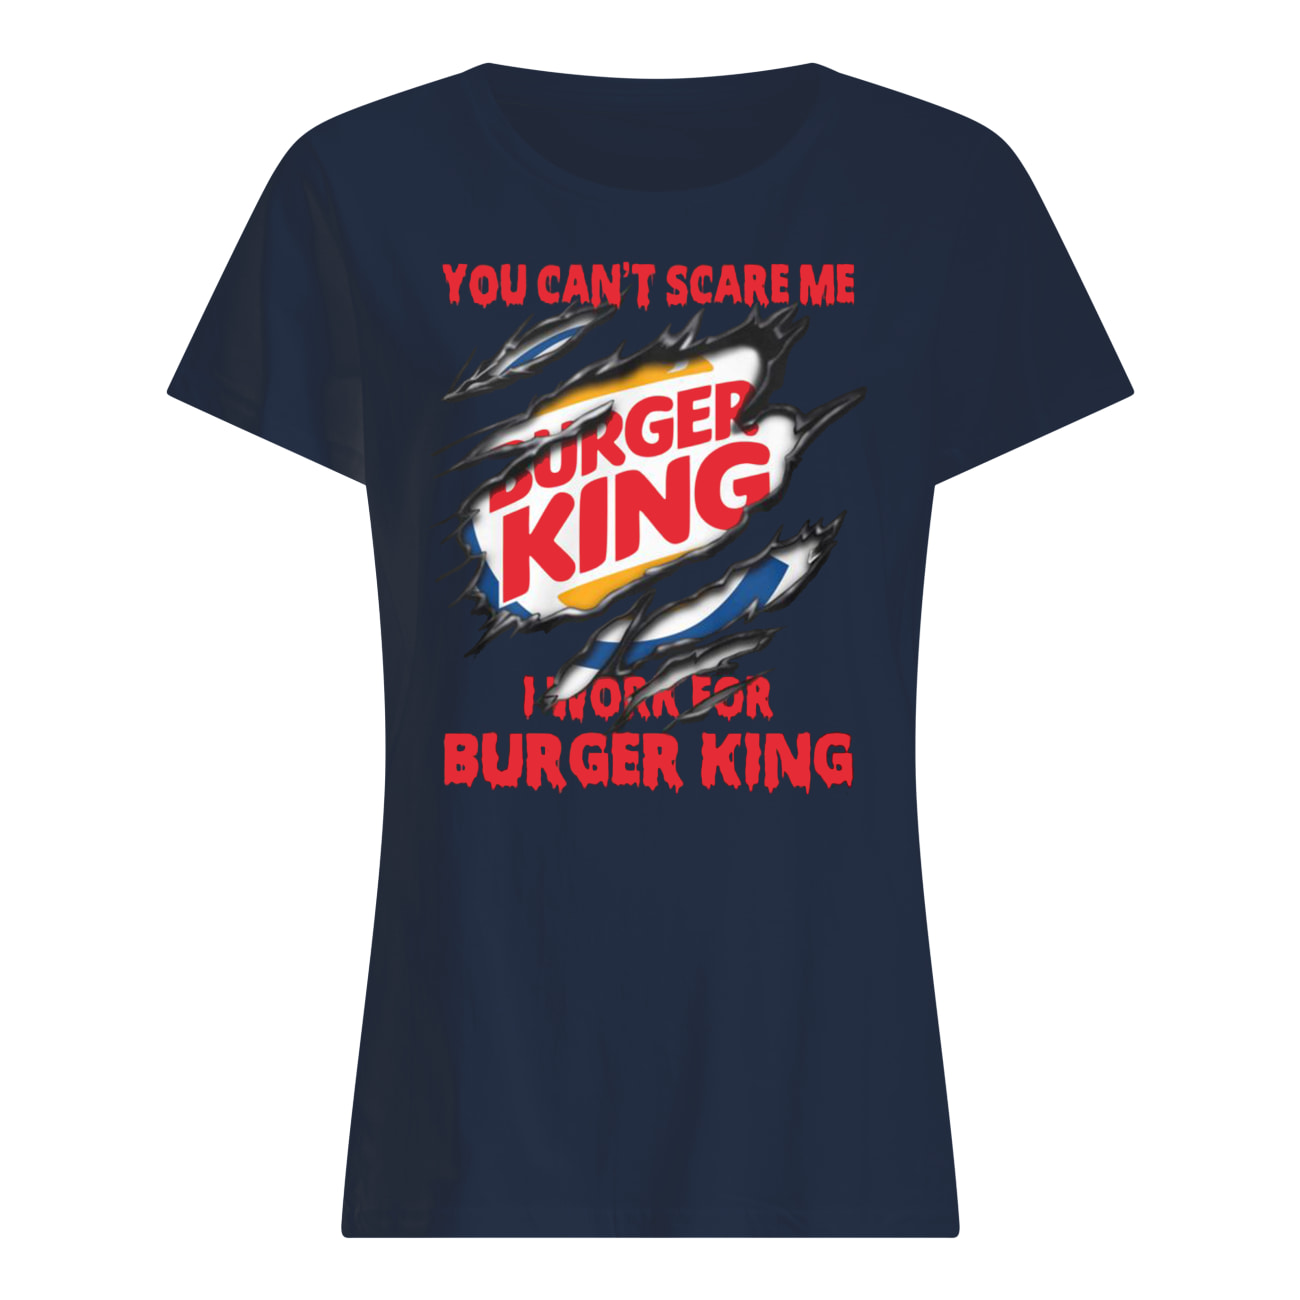 You can't scare me I work for burger king womens shirt